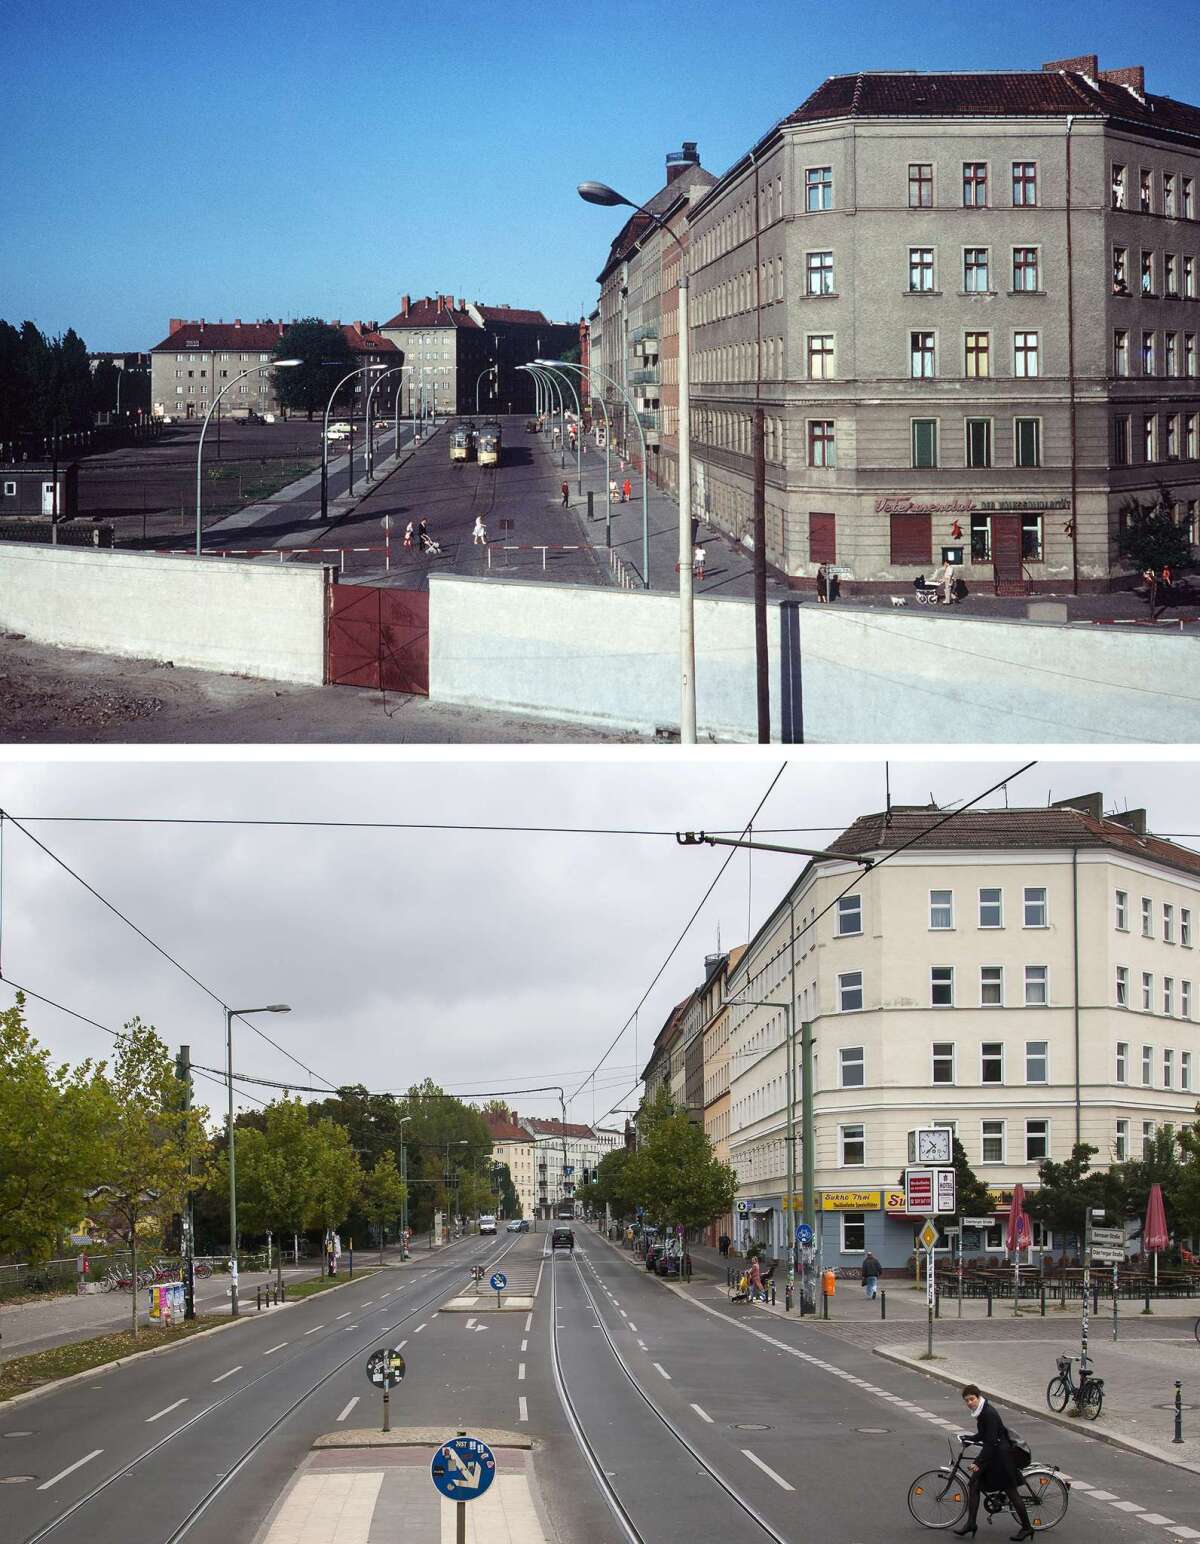 Two view of Eberswalder Strasse and Oderberger Strasse in East Berlin, before and after the fall of the Berlin Wall.